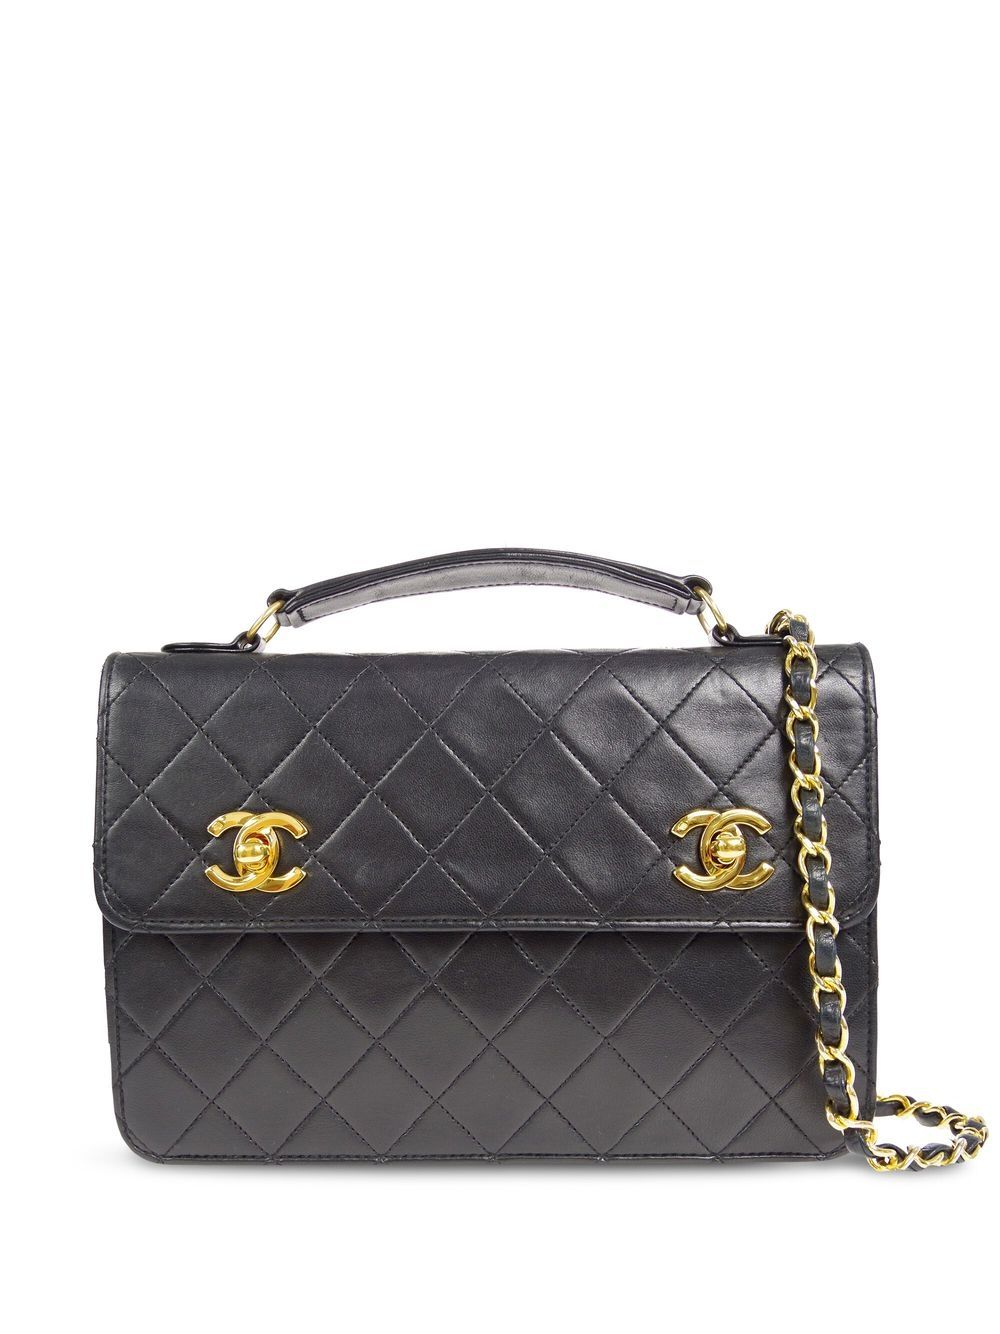 CHANEL Pre-Owned 1990 diamond-quilted leather satchel